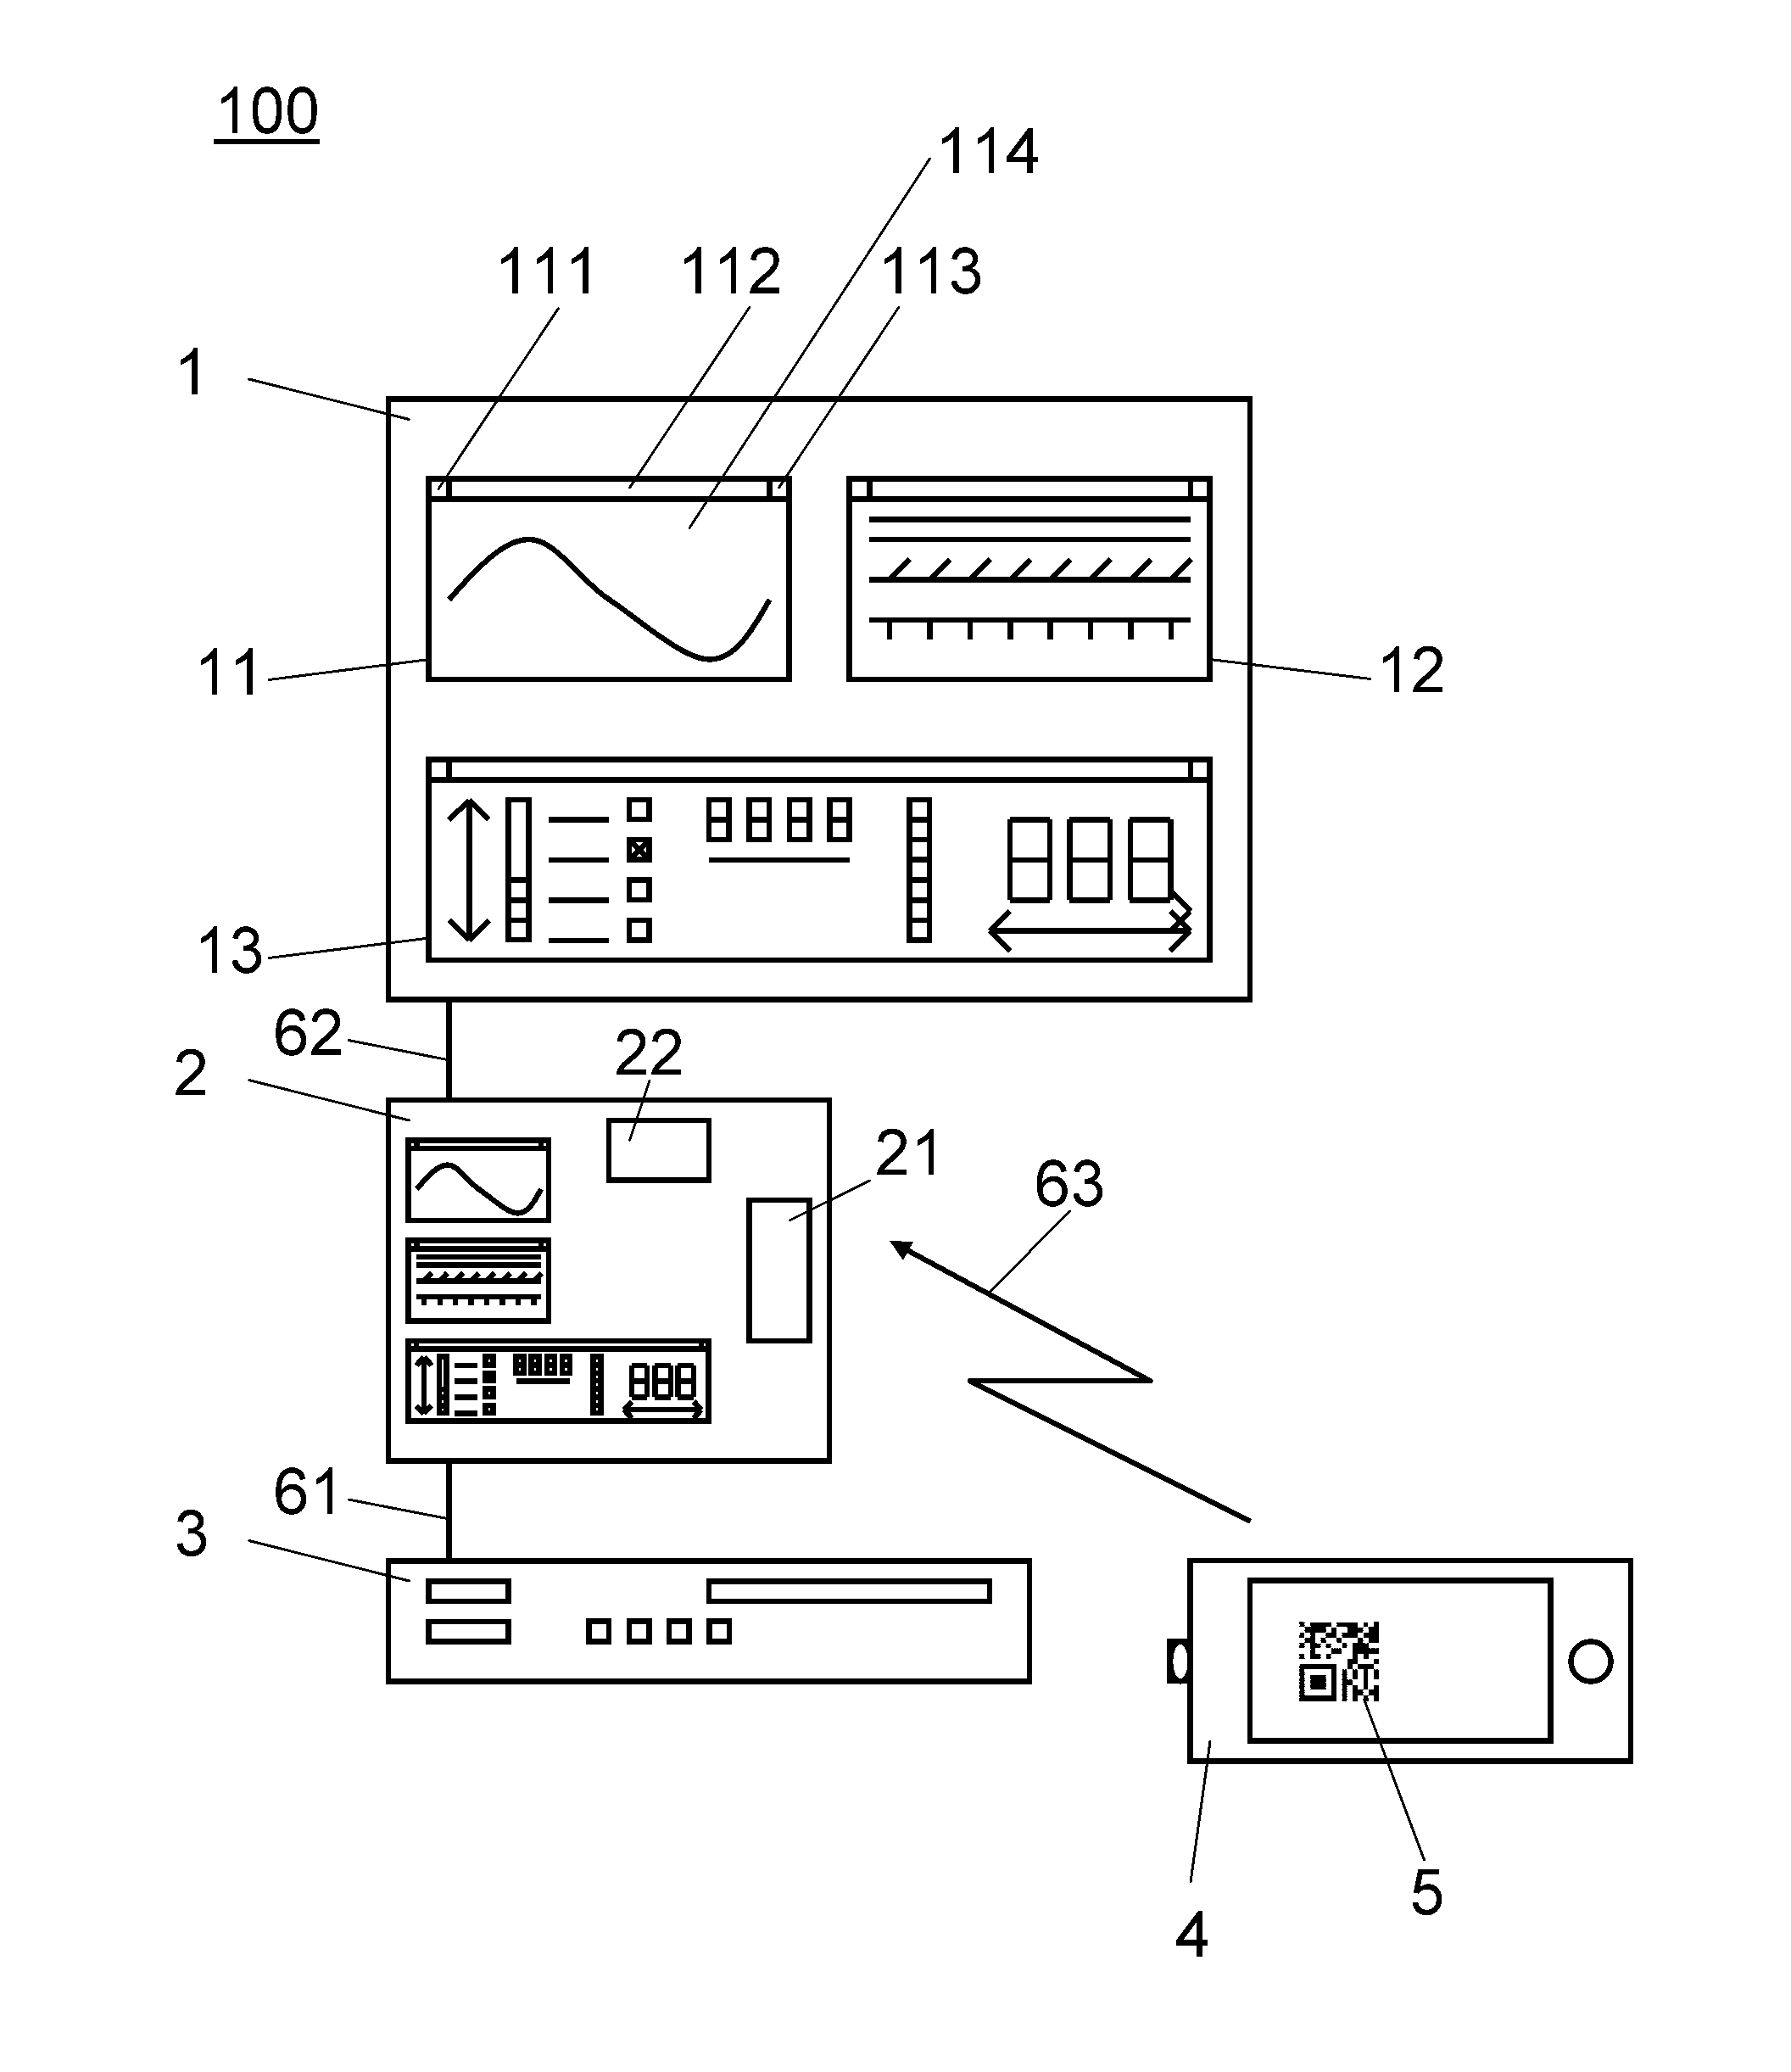 Computer-implemented system and method of enabling a user to interact with an electronic test equipment using a mobile device